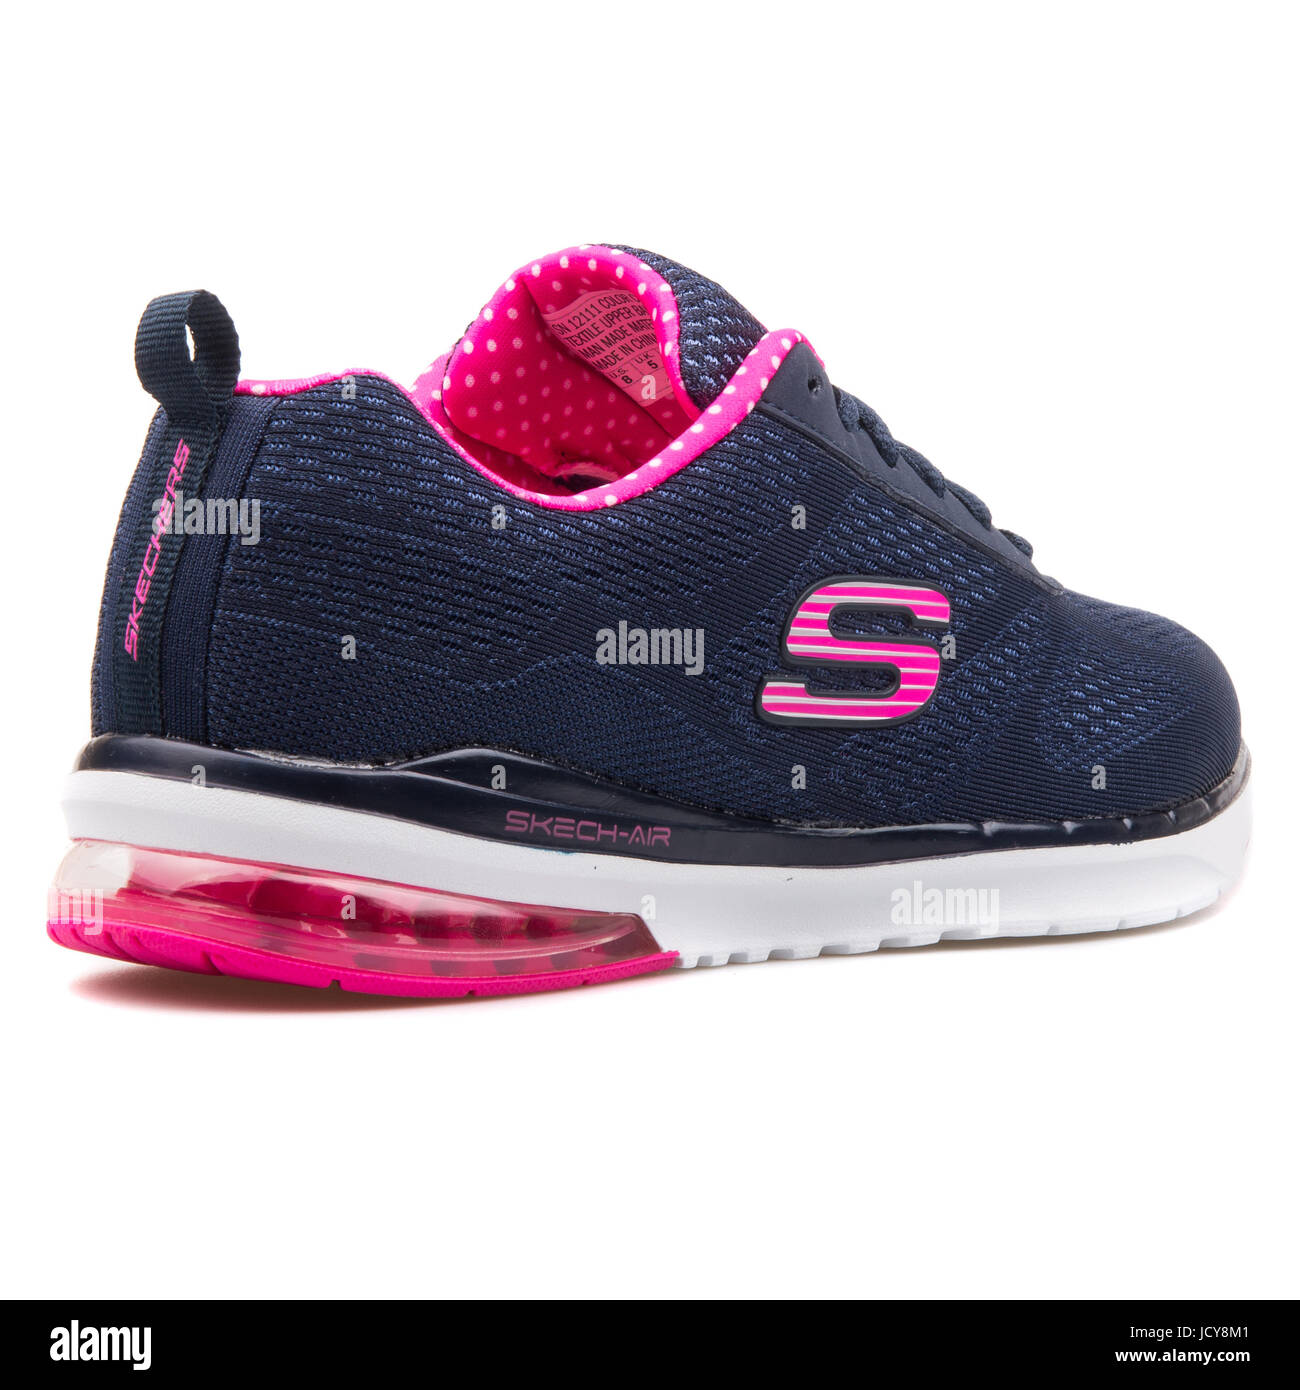 Skechers Skech-Air Infinity Navy Blue and Pink Women's Running Shoes -  12111-NVPK Stock Photo - Alamy